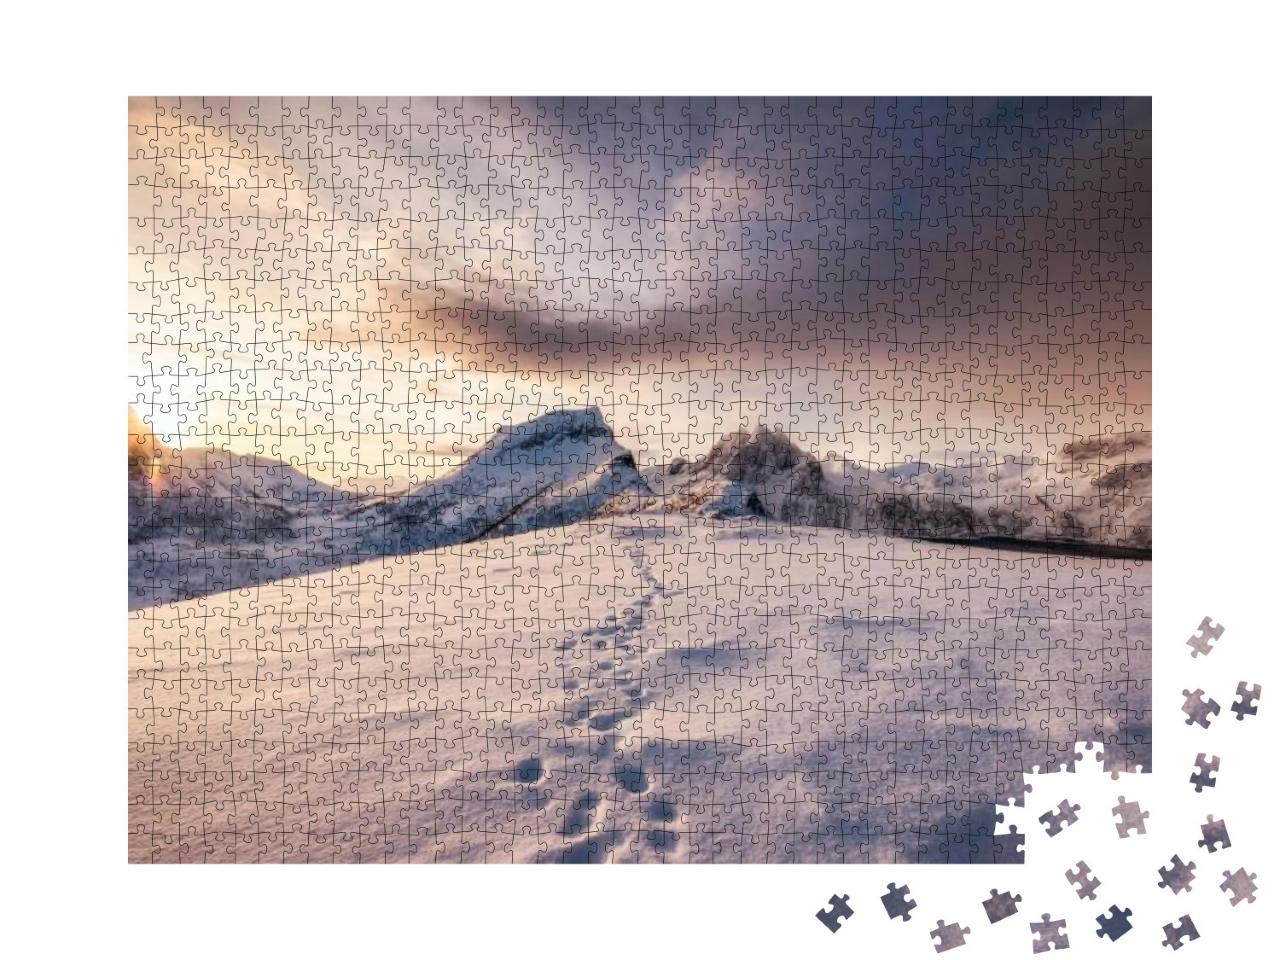 Landscape of Snow Mountains Range with Footprint on Snowy... Jigsaw Puzzle with 1000 pieces